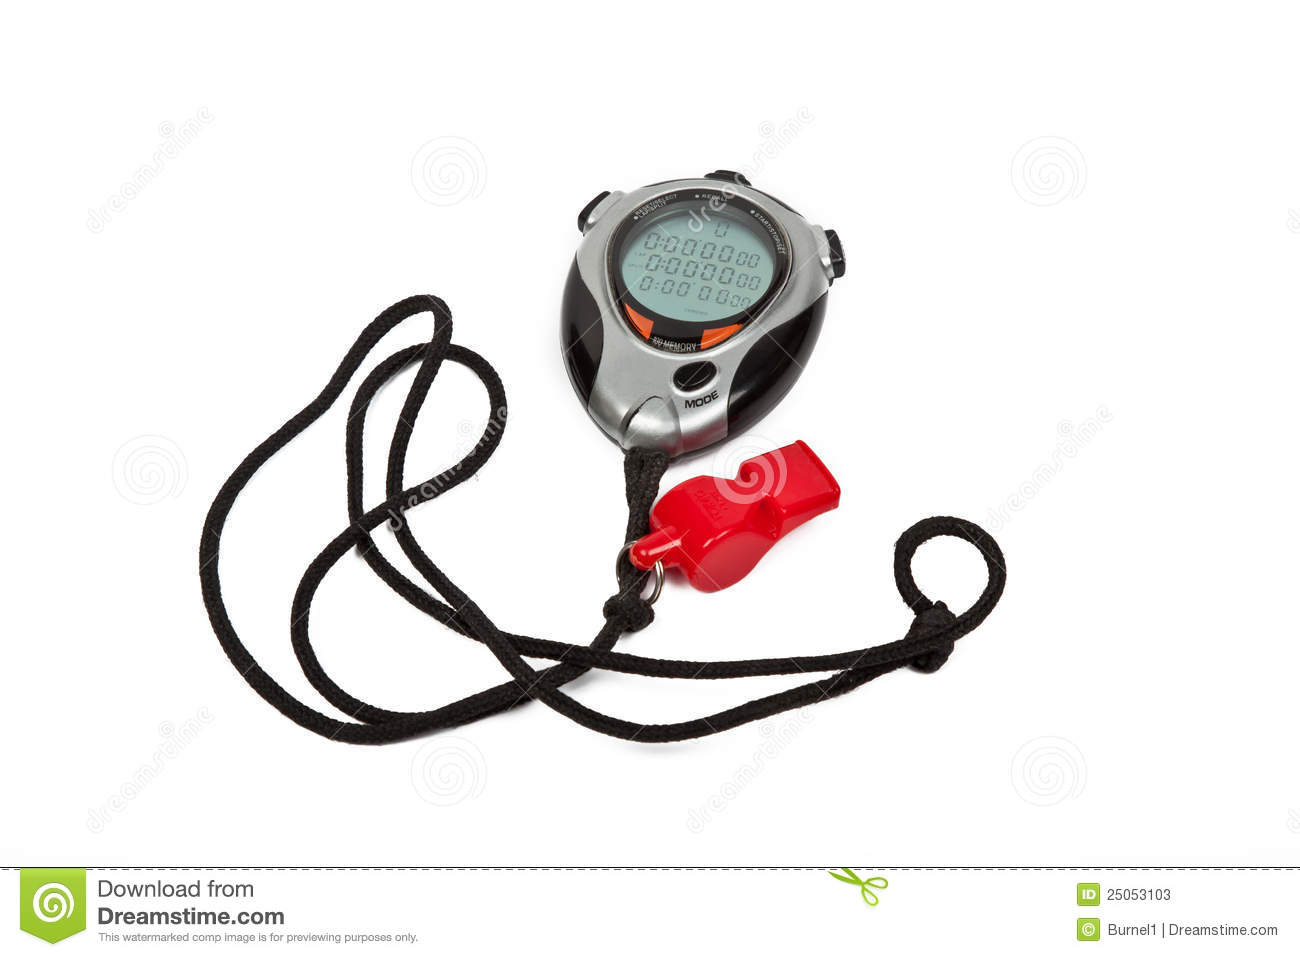 Digital Stop Watch And Red Whistle On White Background 